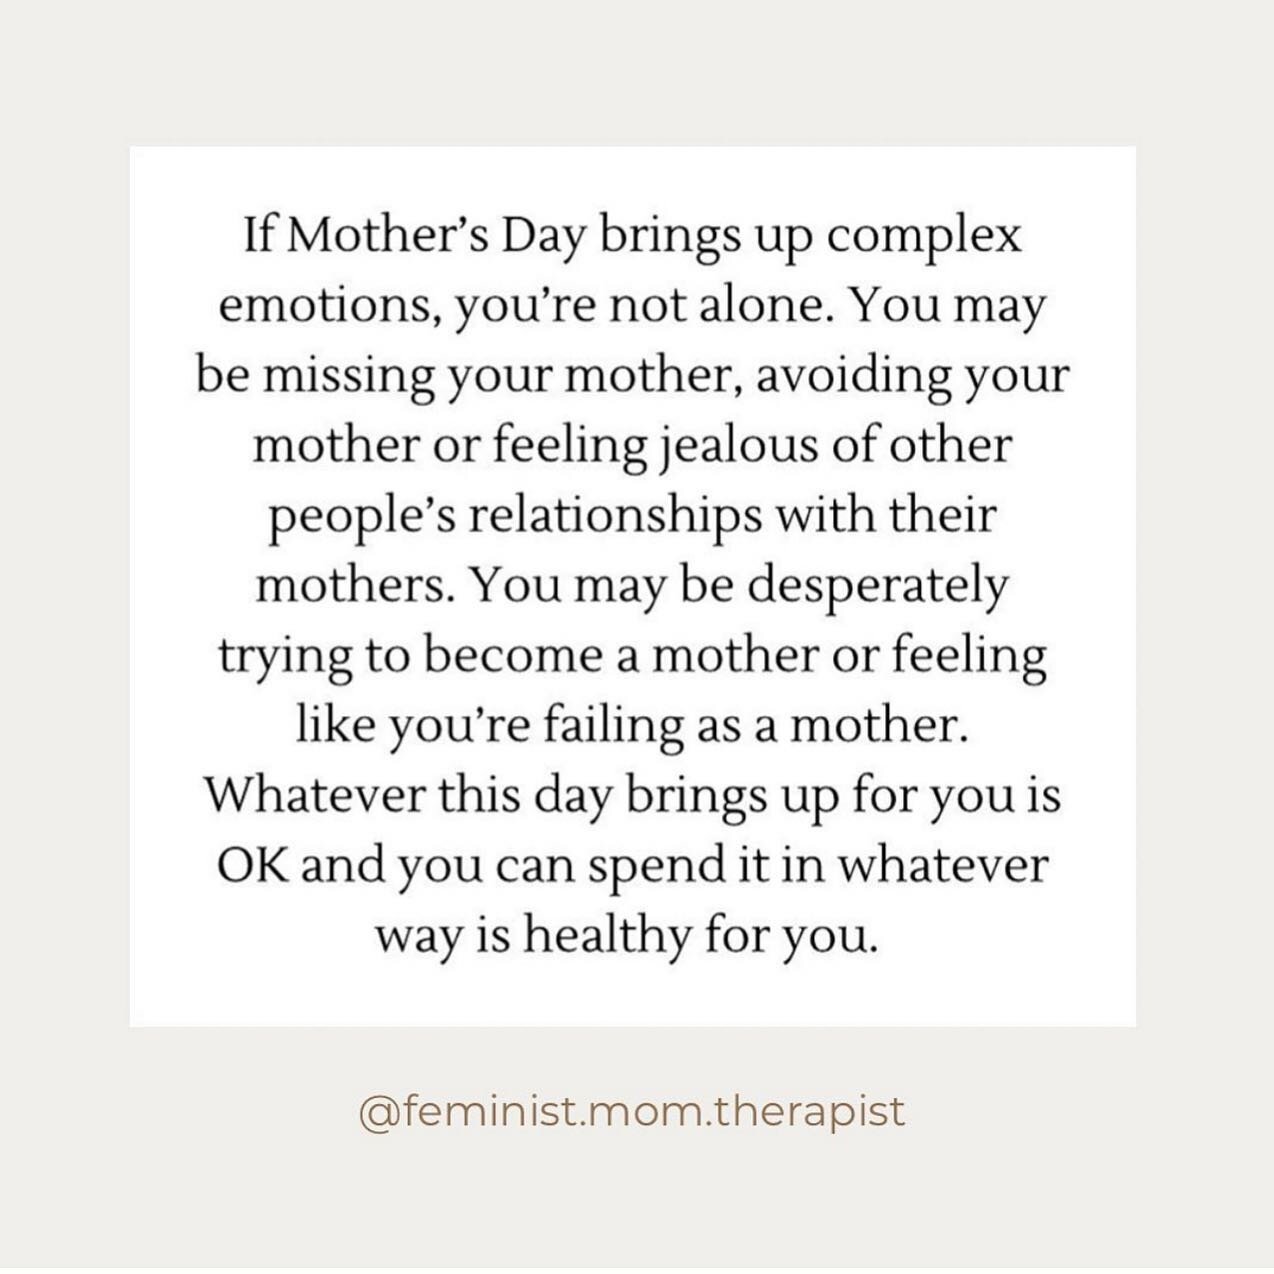 Mother's Day means different things to each of us and can be a simple day of celebration or a day of grief. It's important to honor the complexities in your relationship with your mother and where you are in your motherhood journey. Sending you warmt